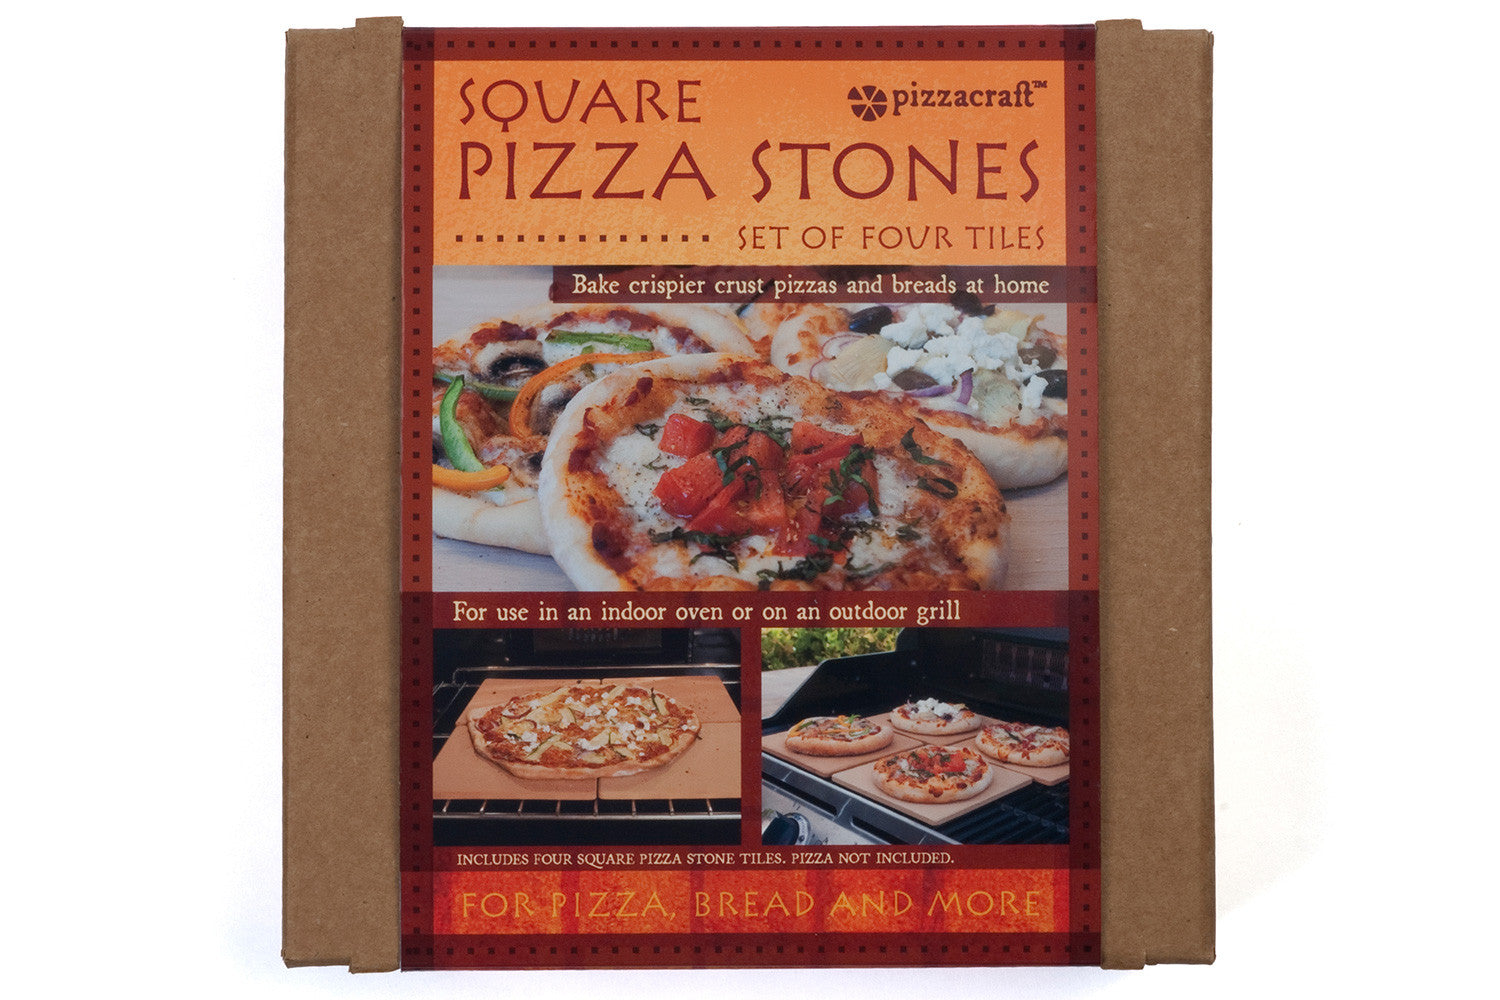 Packaging for the Set of Four 7.5" Square Mini Cordierite Pizza Stone Tiles